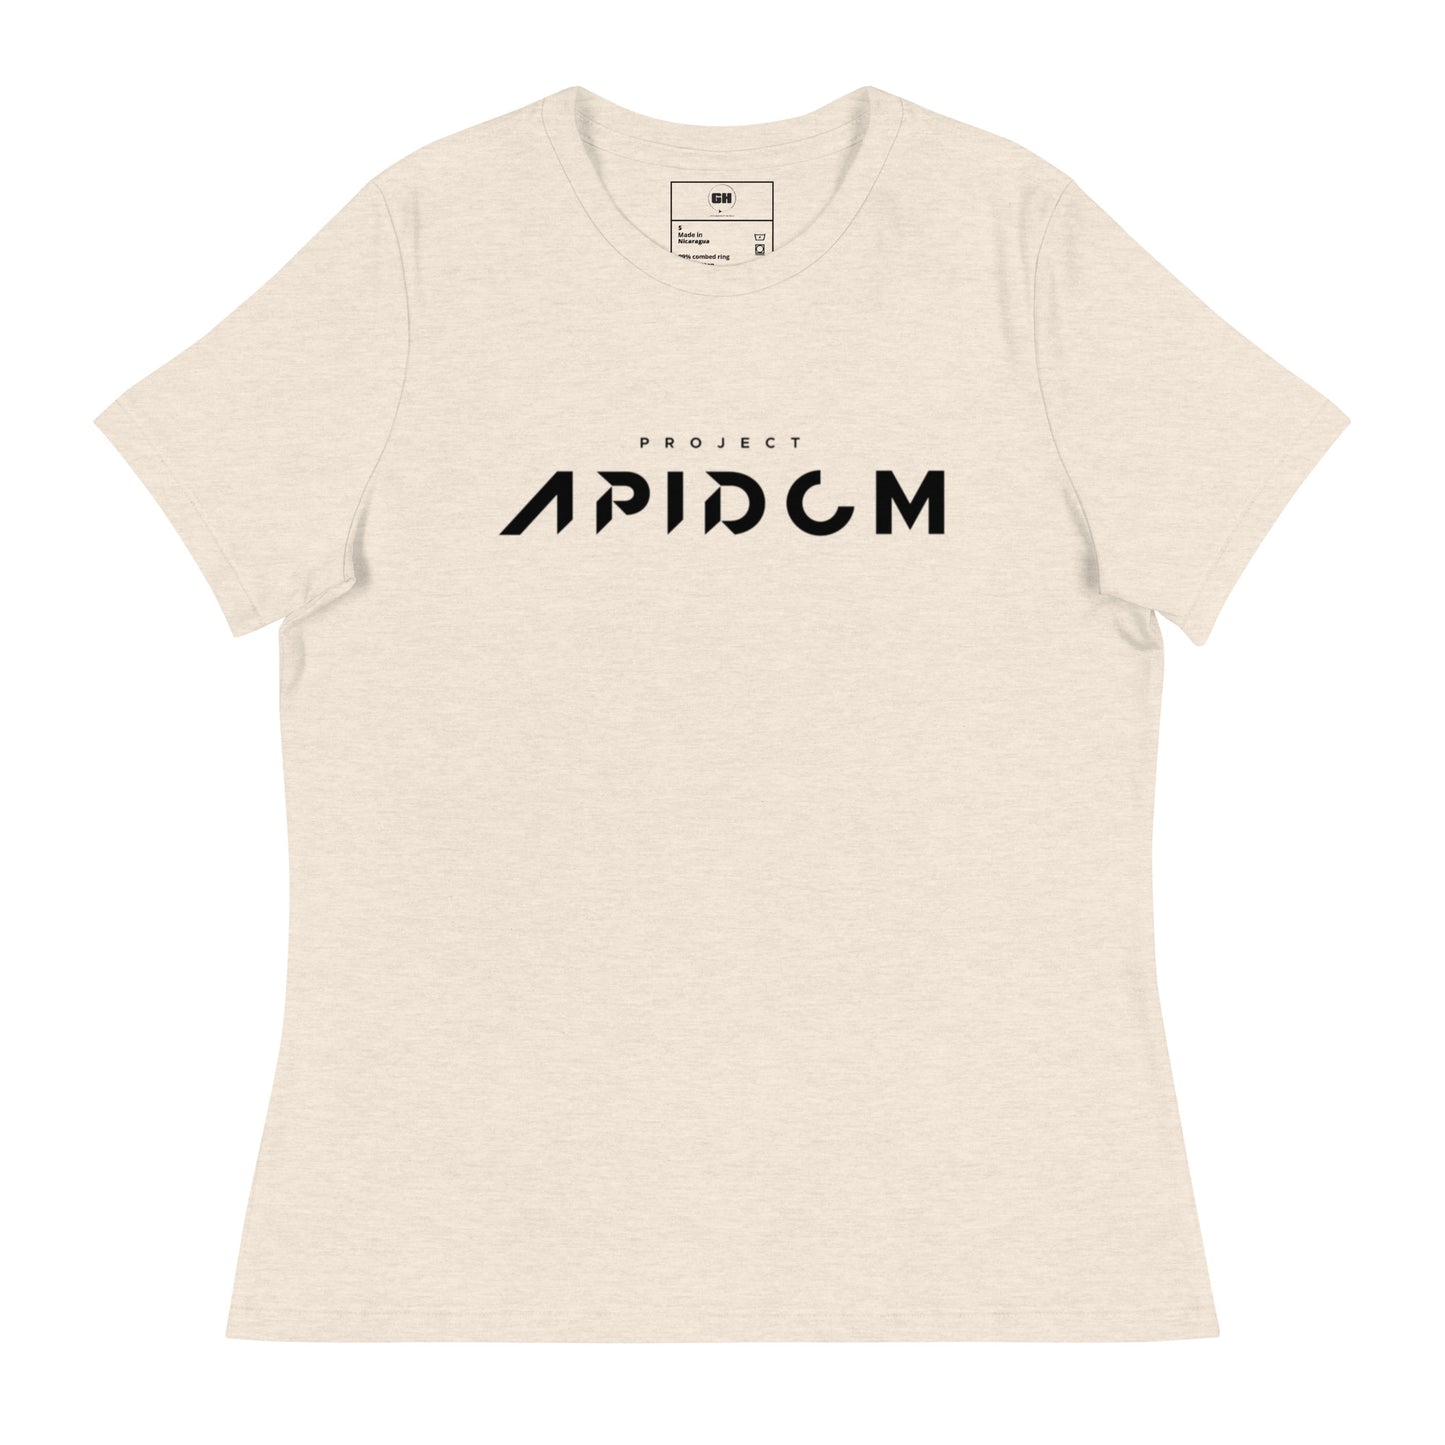 Project_Apidom_Women's Relaxed T-Shirt